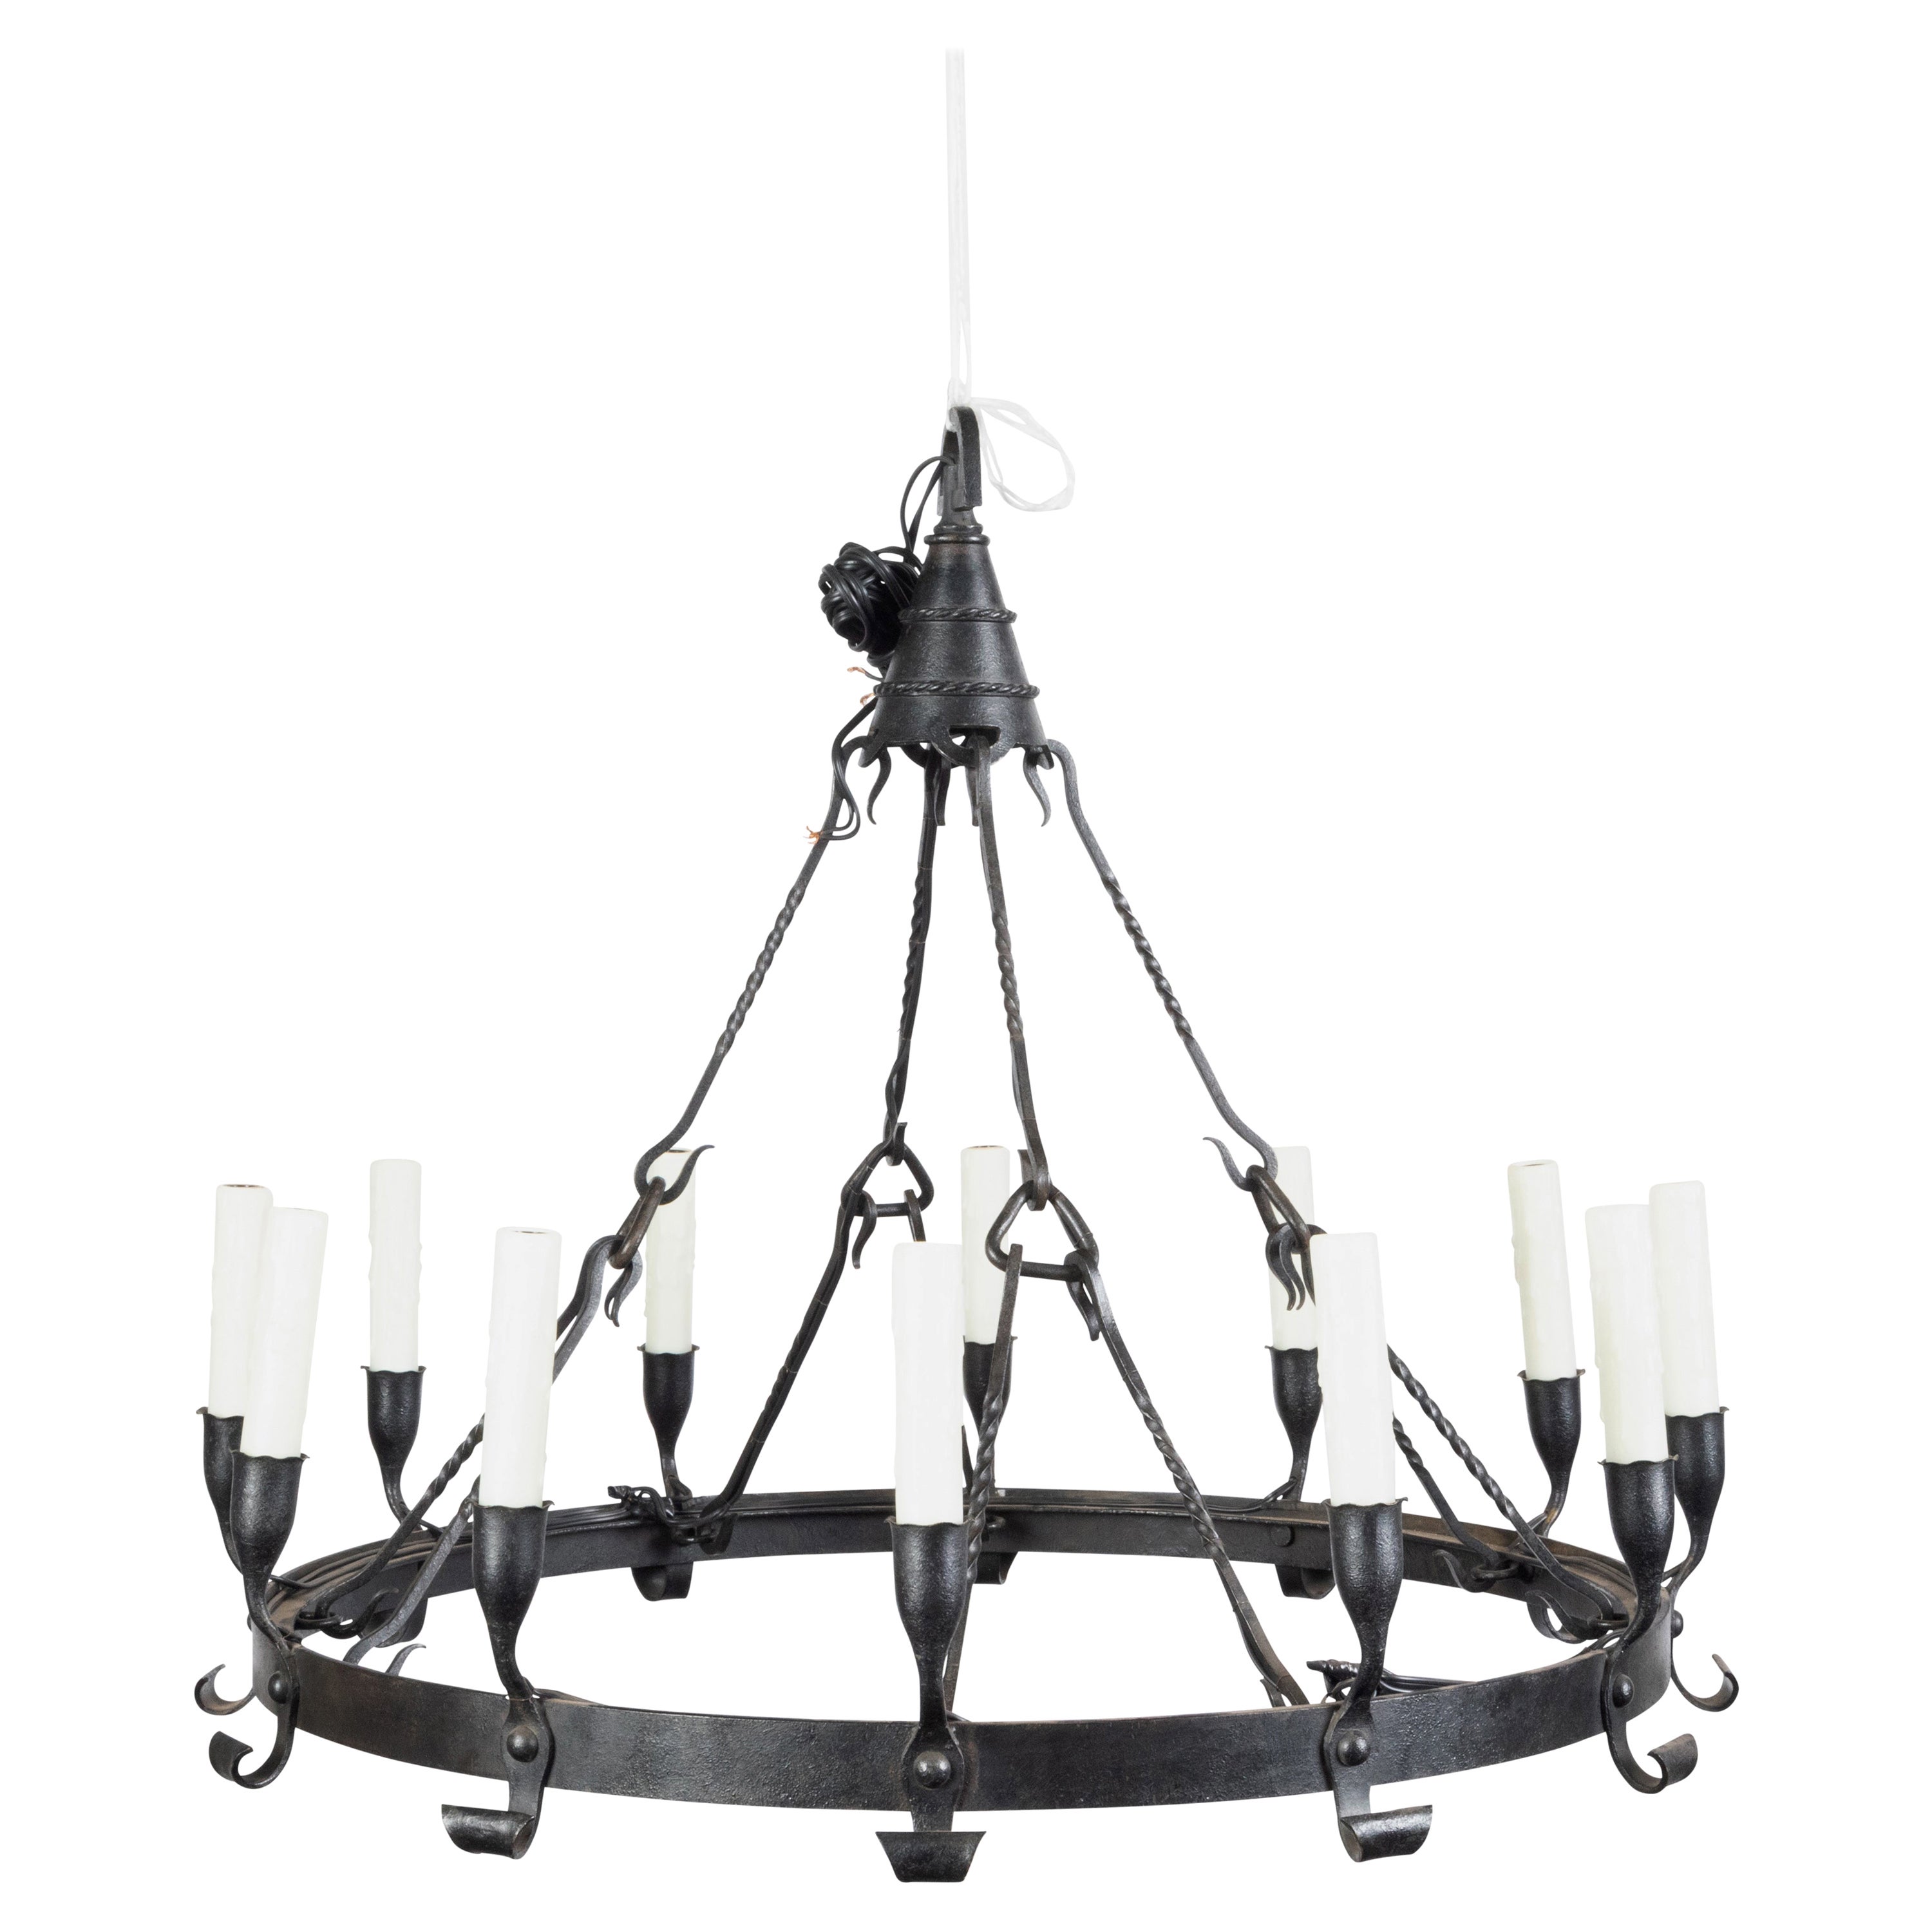 Spanish Colonial 1900s 12-Light Iron Chandelier with Ring and Dark Patina For Sale